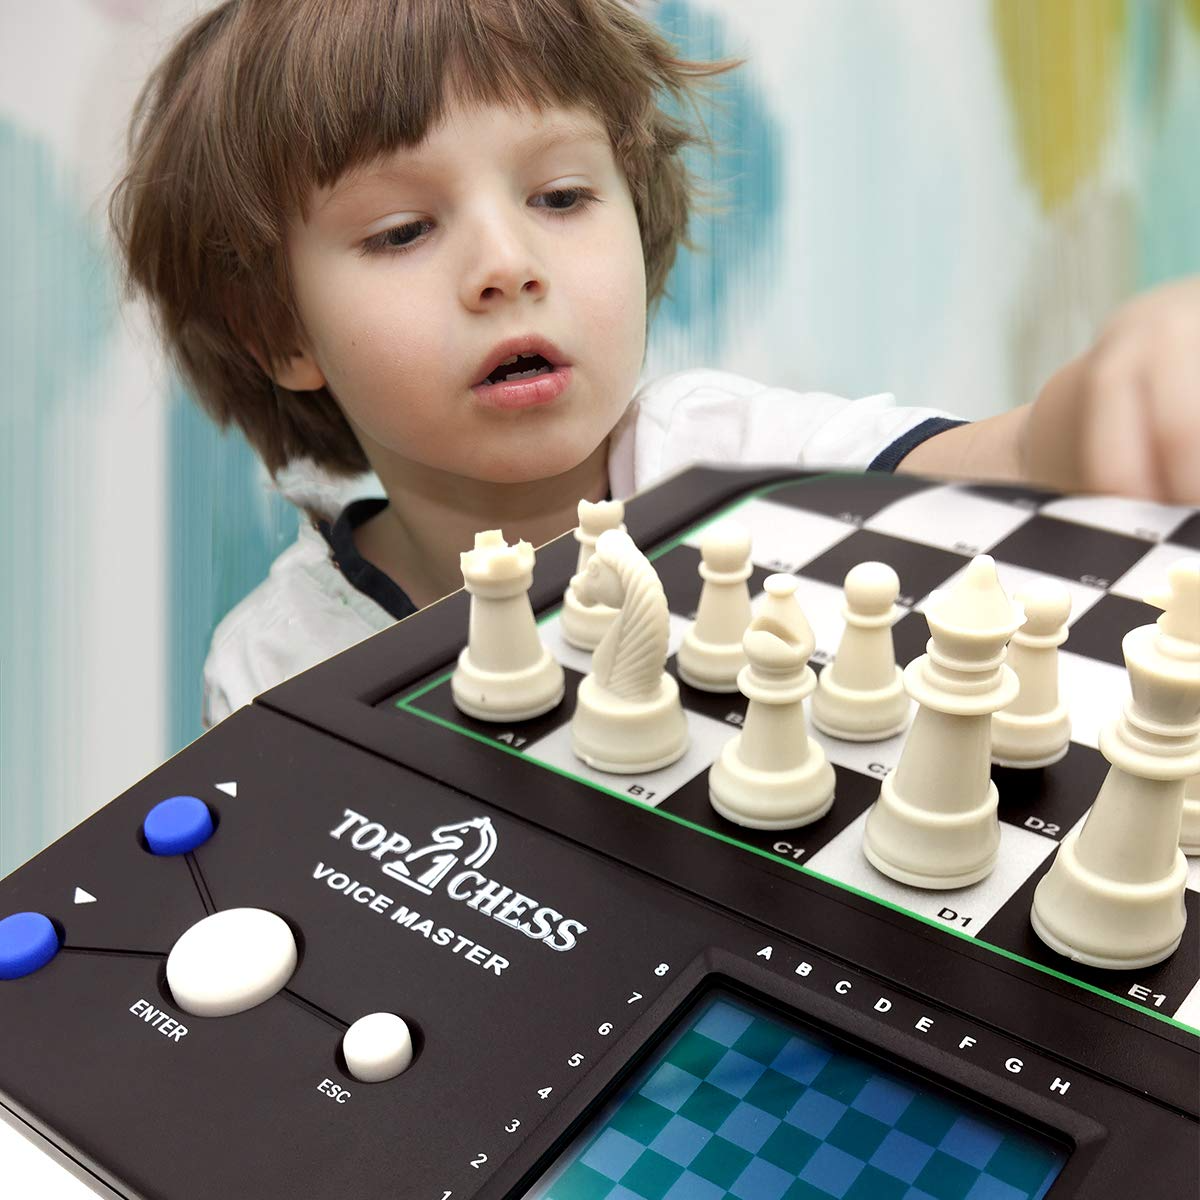 Top 1 Chess Set Board Game, Electronic Voice Chess Academy Classical 8 in 1 Computer Voice Teaching System